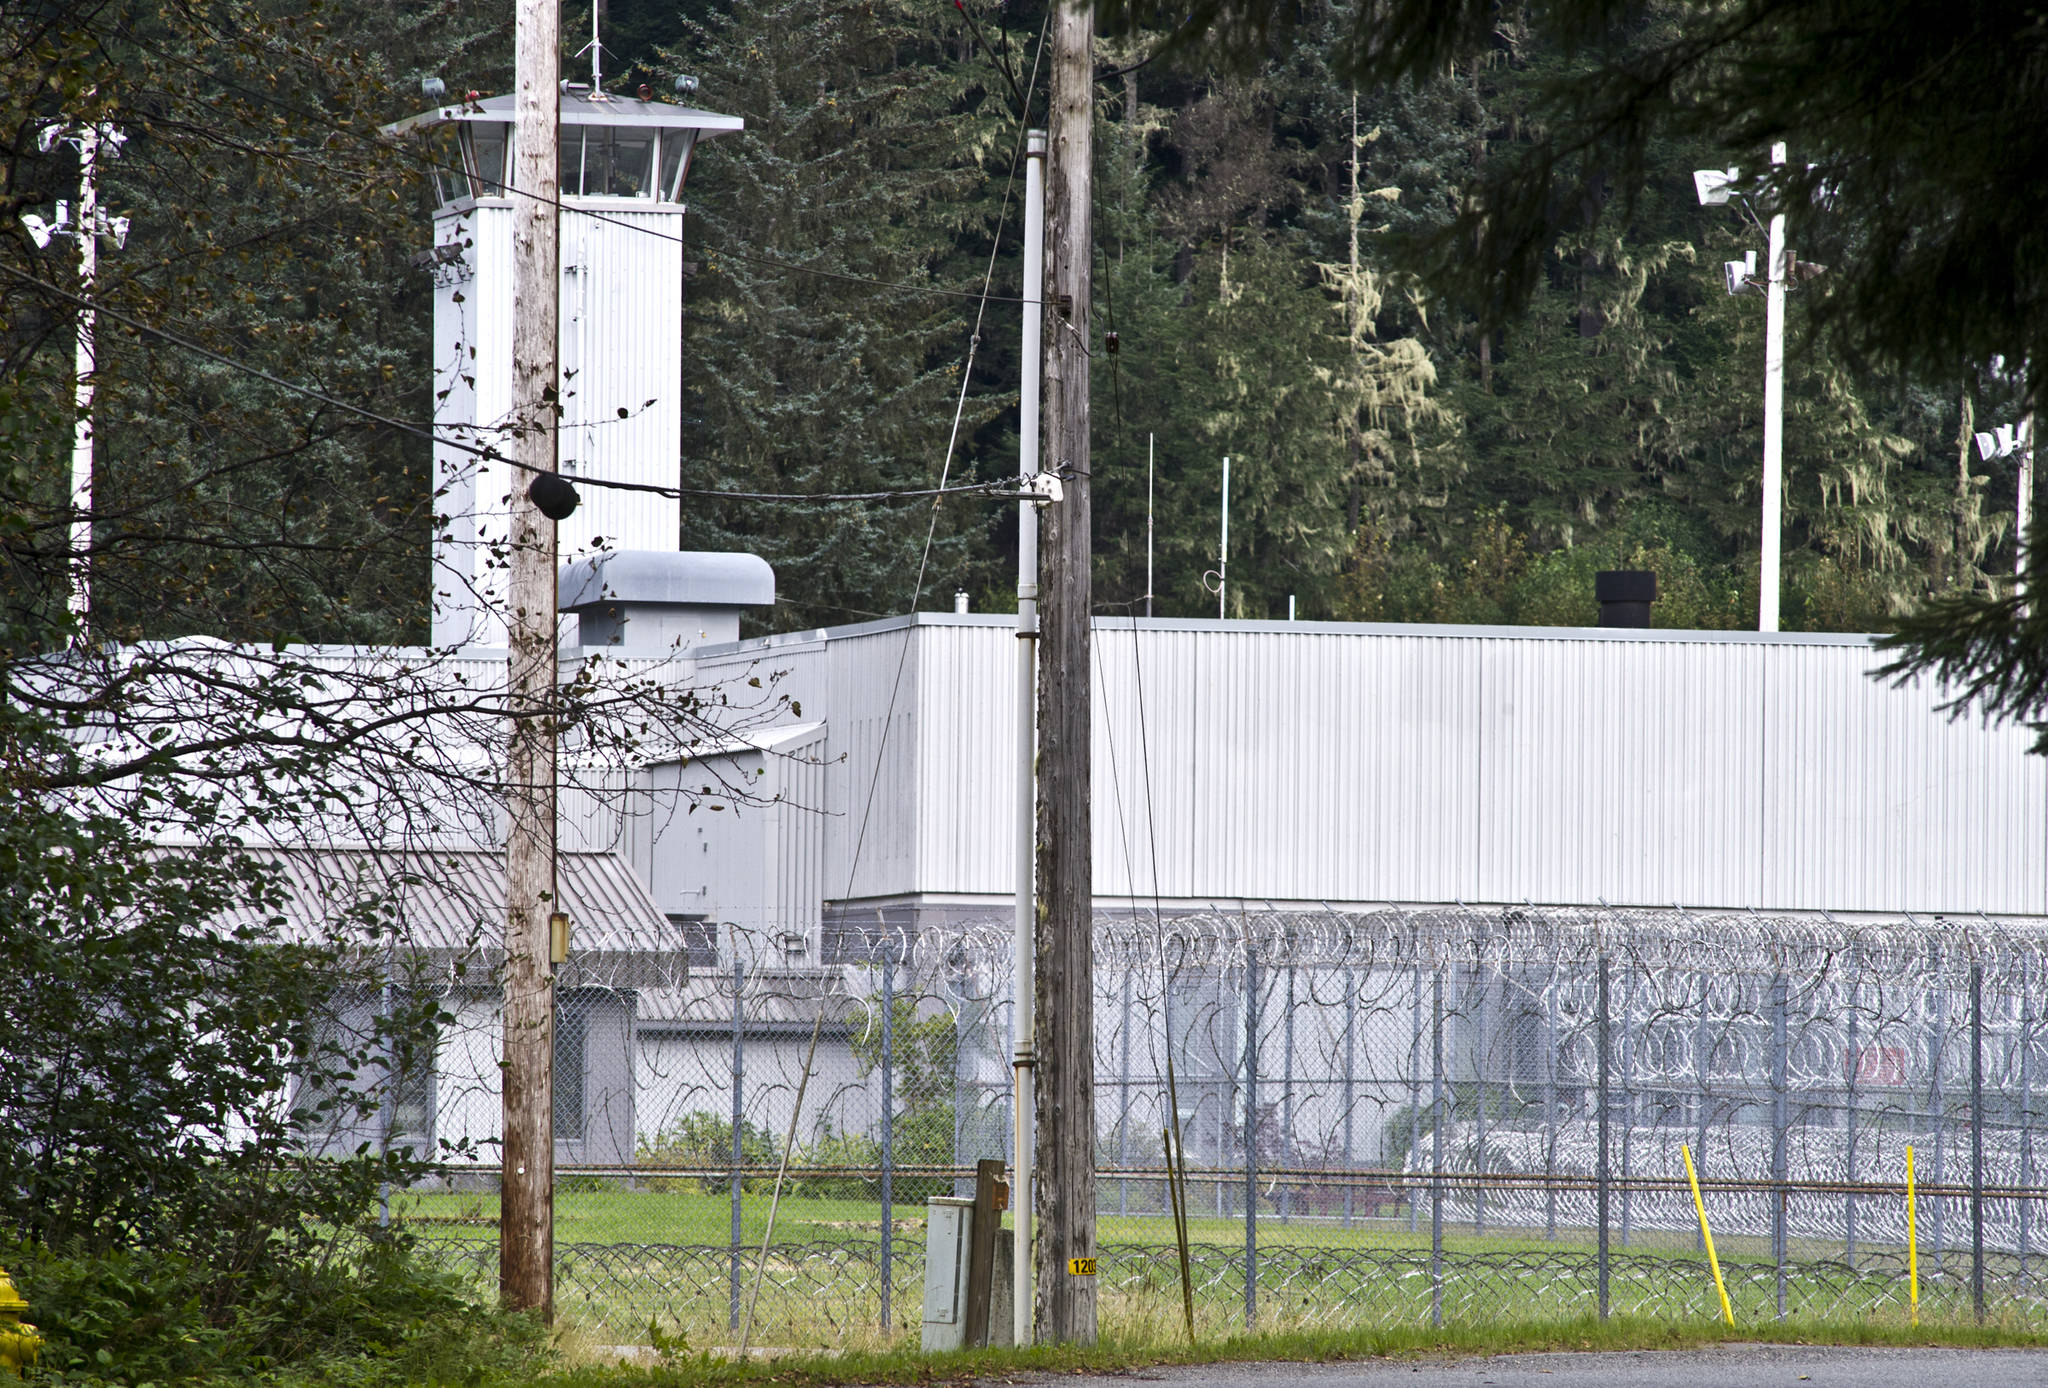 Lemon Creek Correctional Center is seen in this undated photo. The Alaska Senate advanced a criminal justice reform rollback on Monday that could have untold costs for the prison system. (Michael Penn | Juneau Empire file)